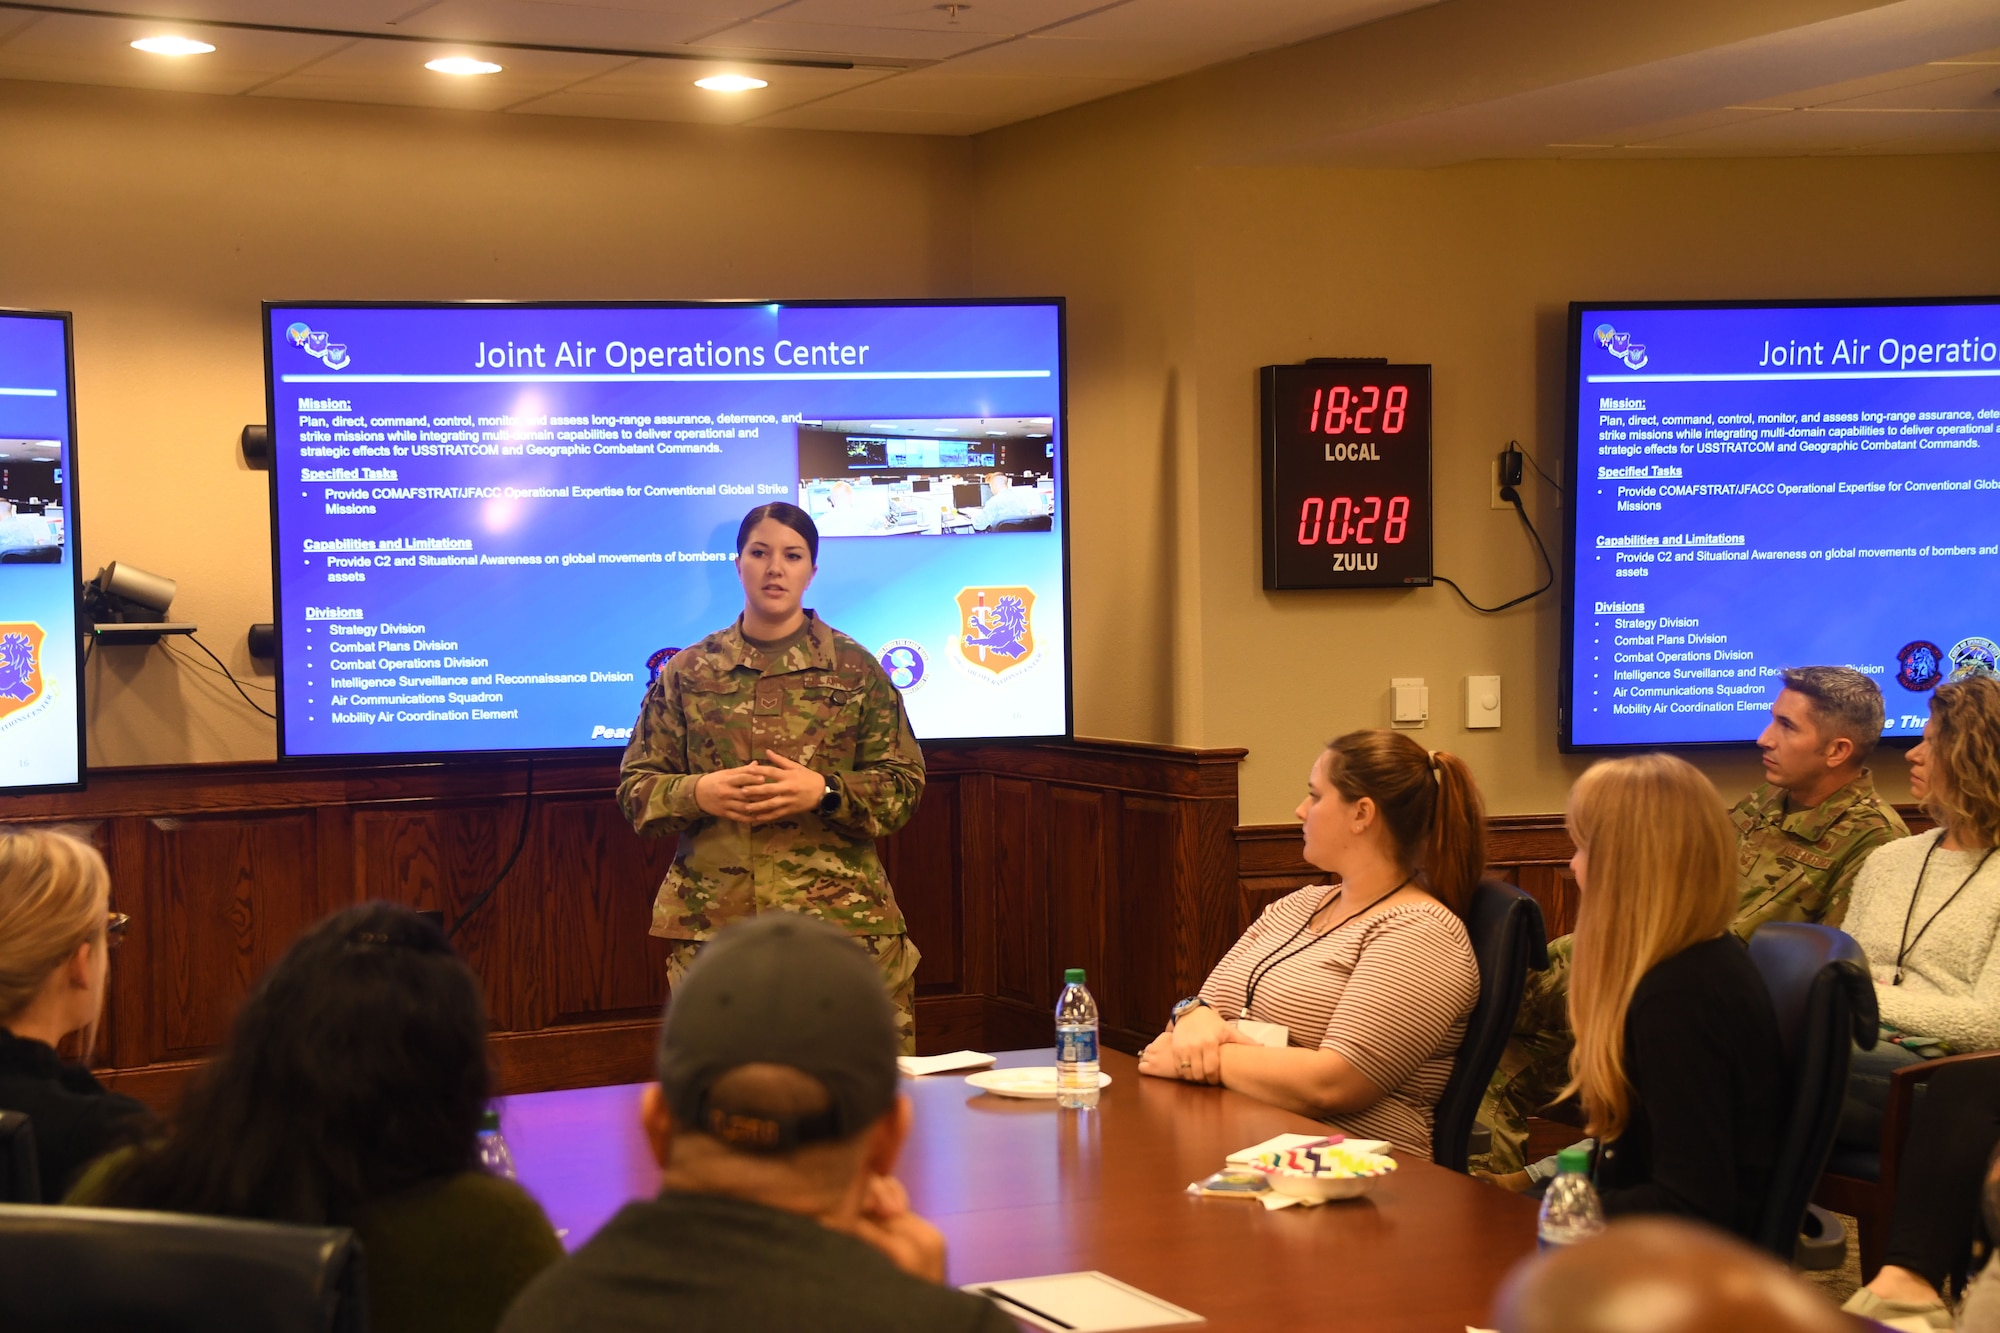 Senior Airman Melissa Carlier, a member of the 608th Air Operations Center ISR division, describes her unit's mission and role within bomber operations during a spouses' orientation at headquarters 8th Air Force, Barksdale AFB, La., Nov. 18, 2019. More than 30 military spouses received an immersion briefing, toured the different centers and met with local leadership. “The commitment and sacrifice it takes to be a military spouse is an honorable quality," said Chief Master Sgt. Melvina Smith, 8th Air Force command chief and J-GSOC senior enlisted leader. "They provide an incomparable level of support, which ultimately affects unit readiness, personal resilience and quality of life.”